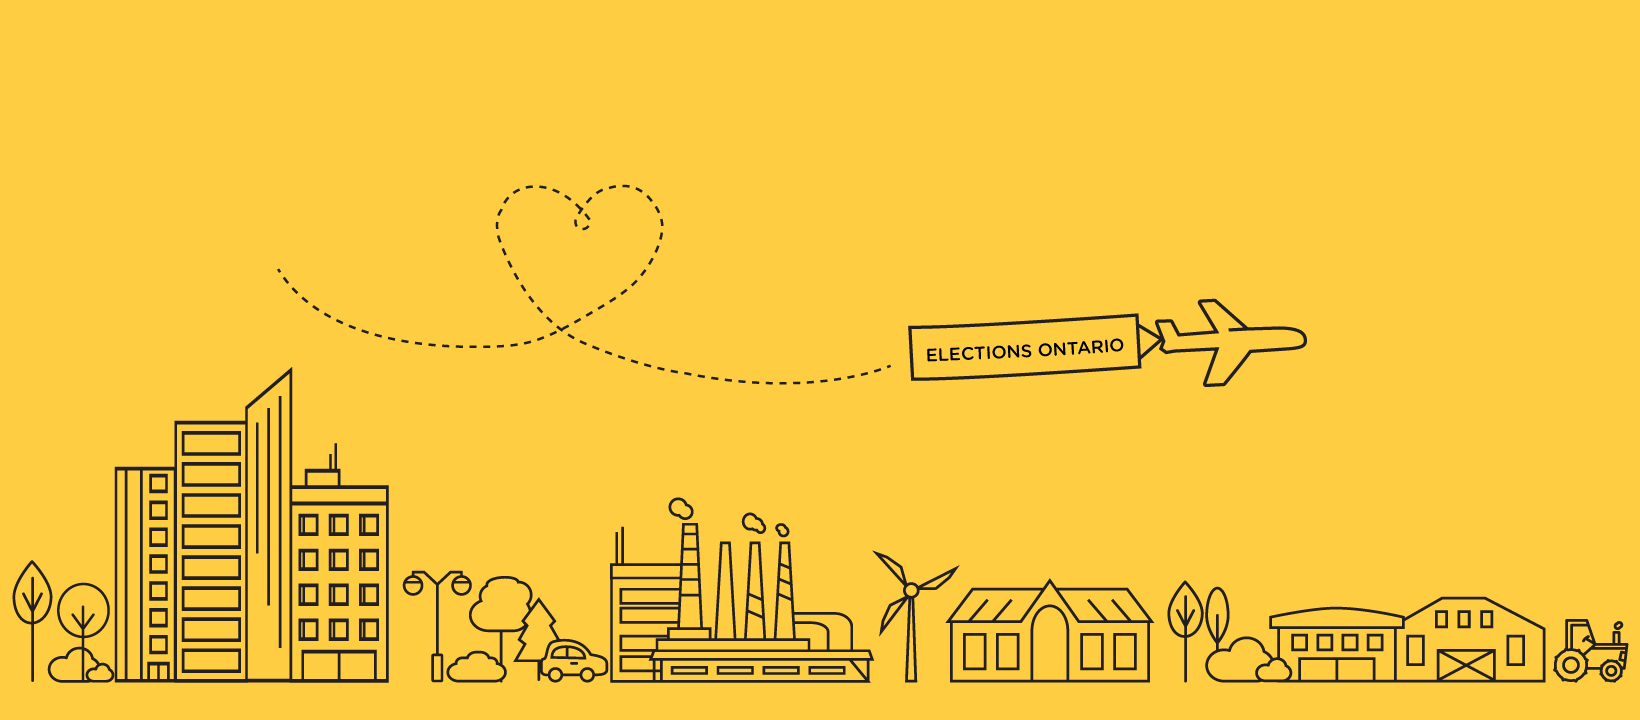 Illustration shows a plane towing an Elections Ontario banner over a city skyline.